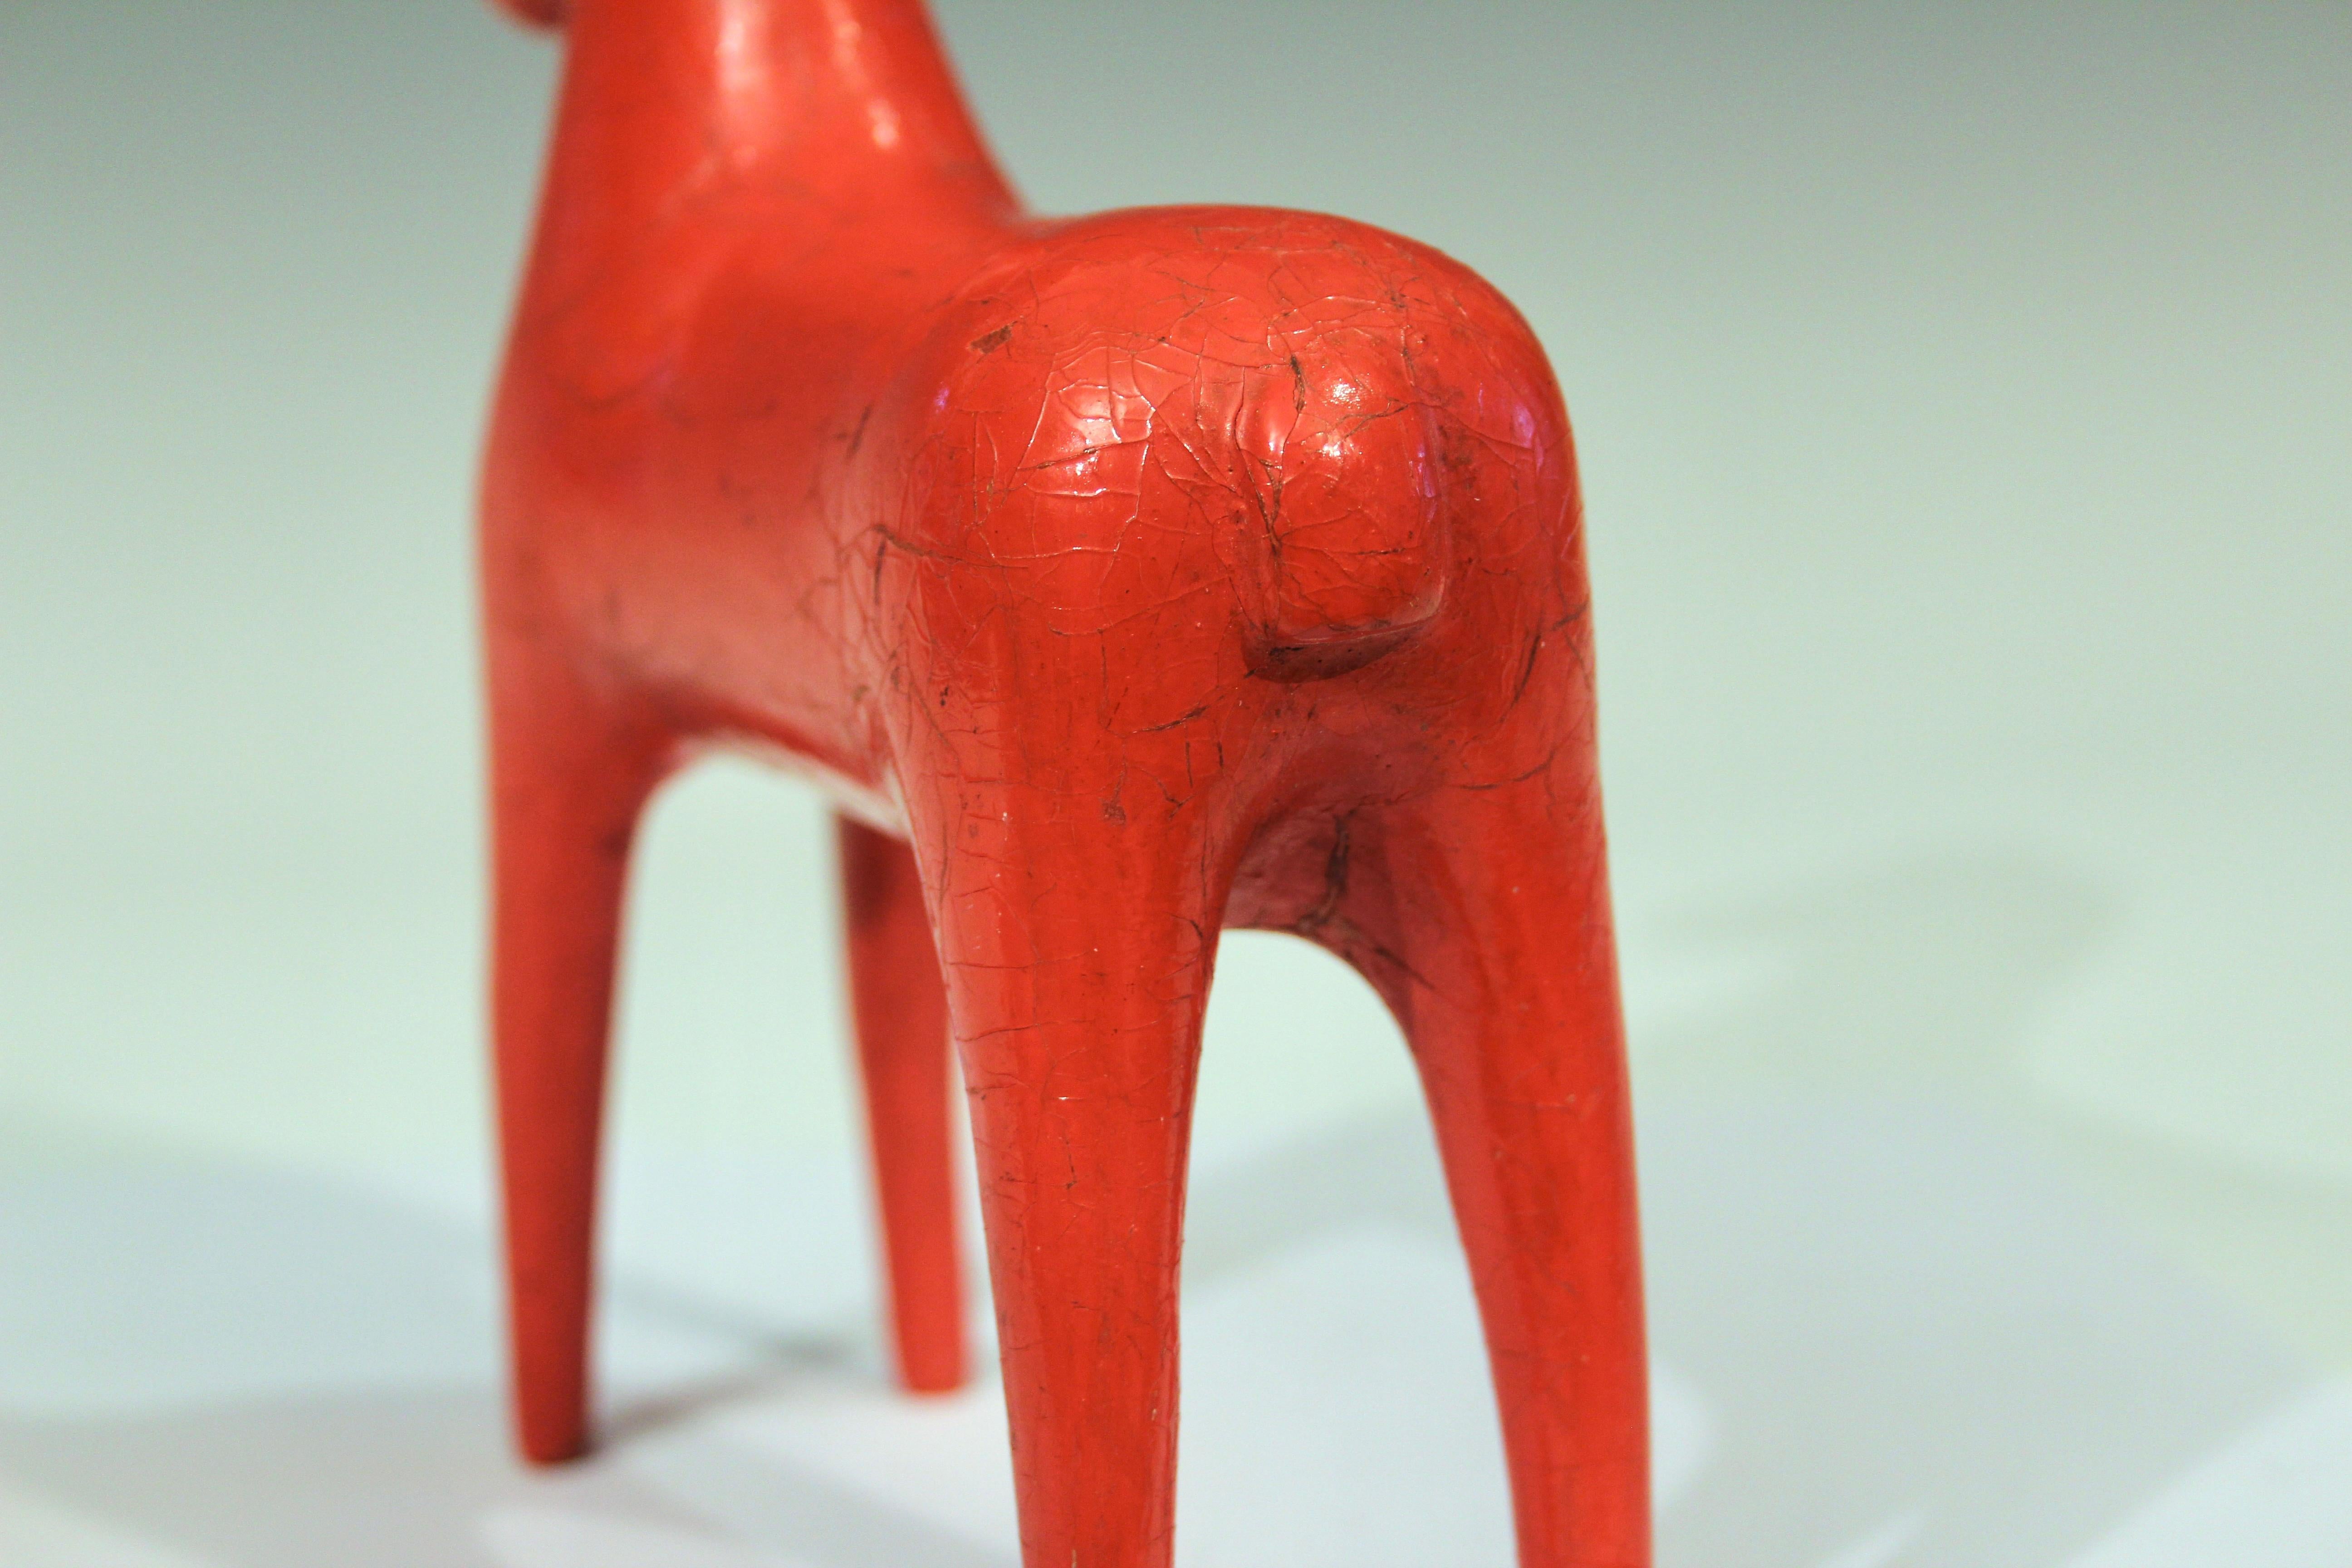 Antique Swedish Dala Horse Table Top Folk Art Carving Sculpture Painted Wood Red 2